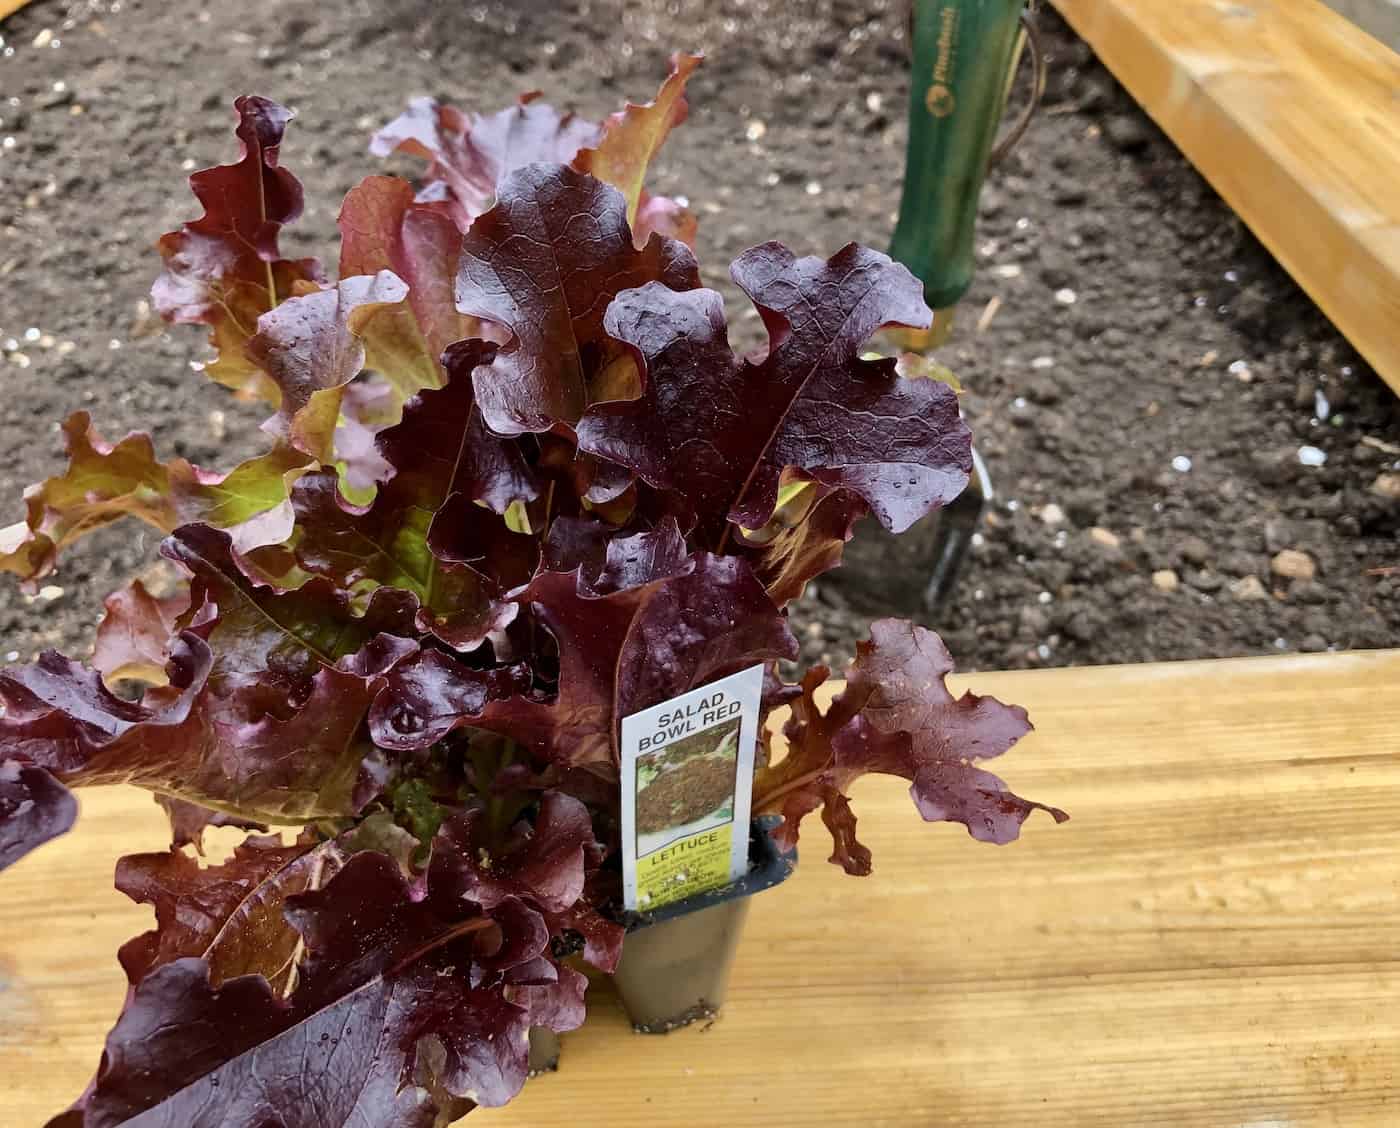 Planting salad bowl red lettuce in the garden